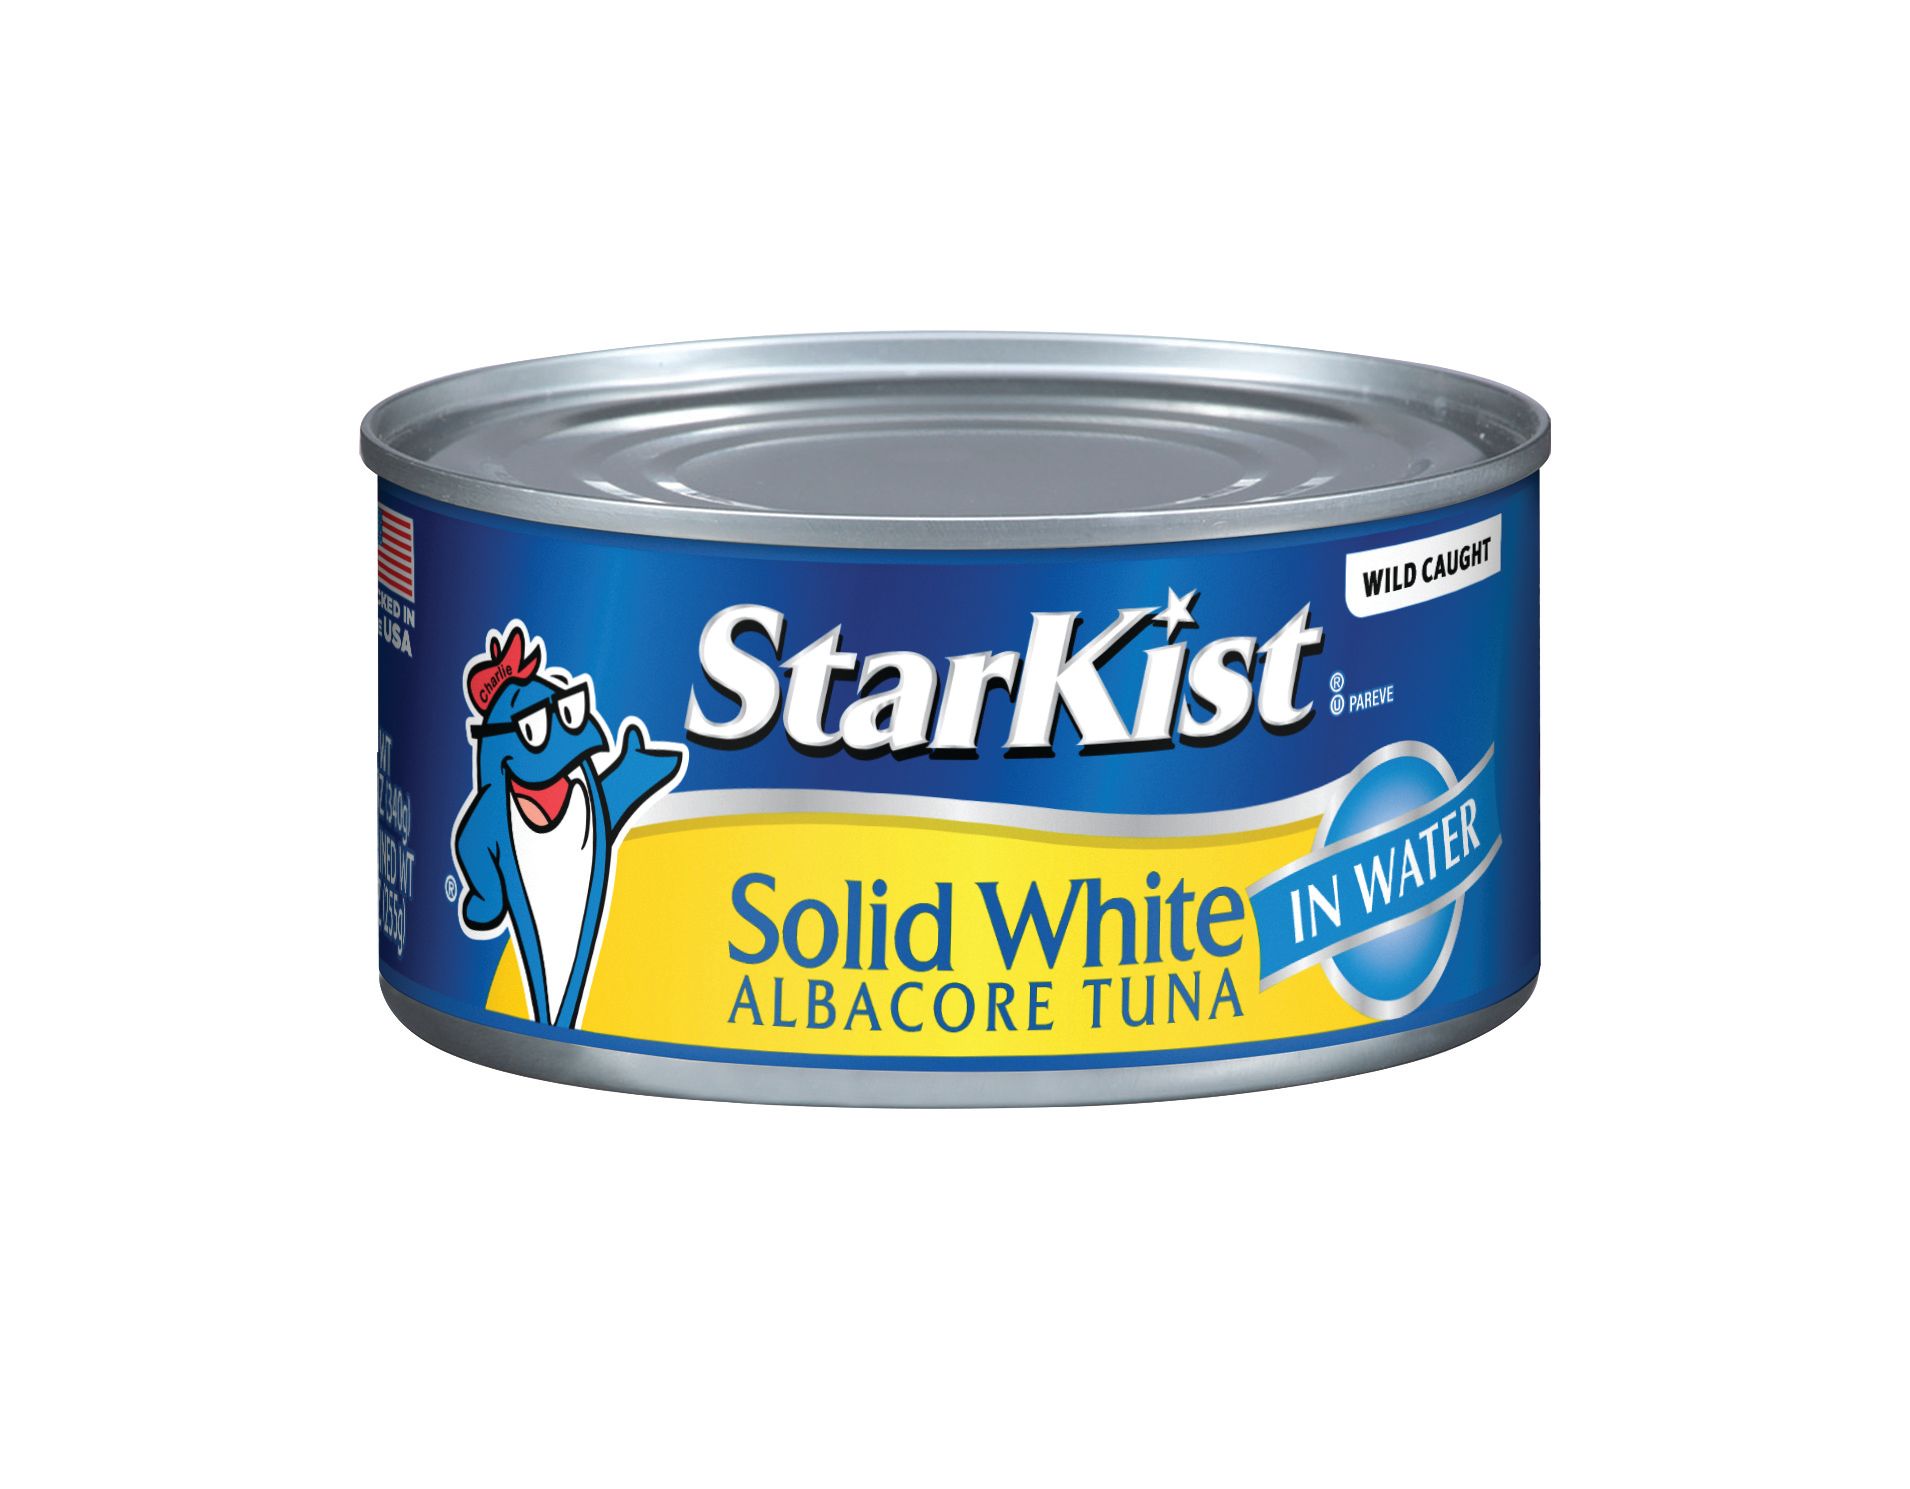 Starkist Solid White Tuna in Water, 12 Ounce -- 12 per case.